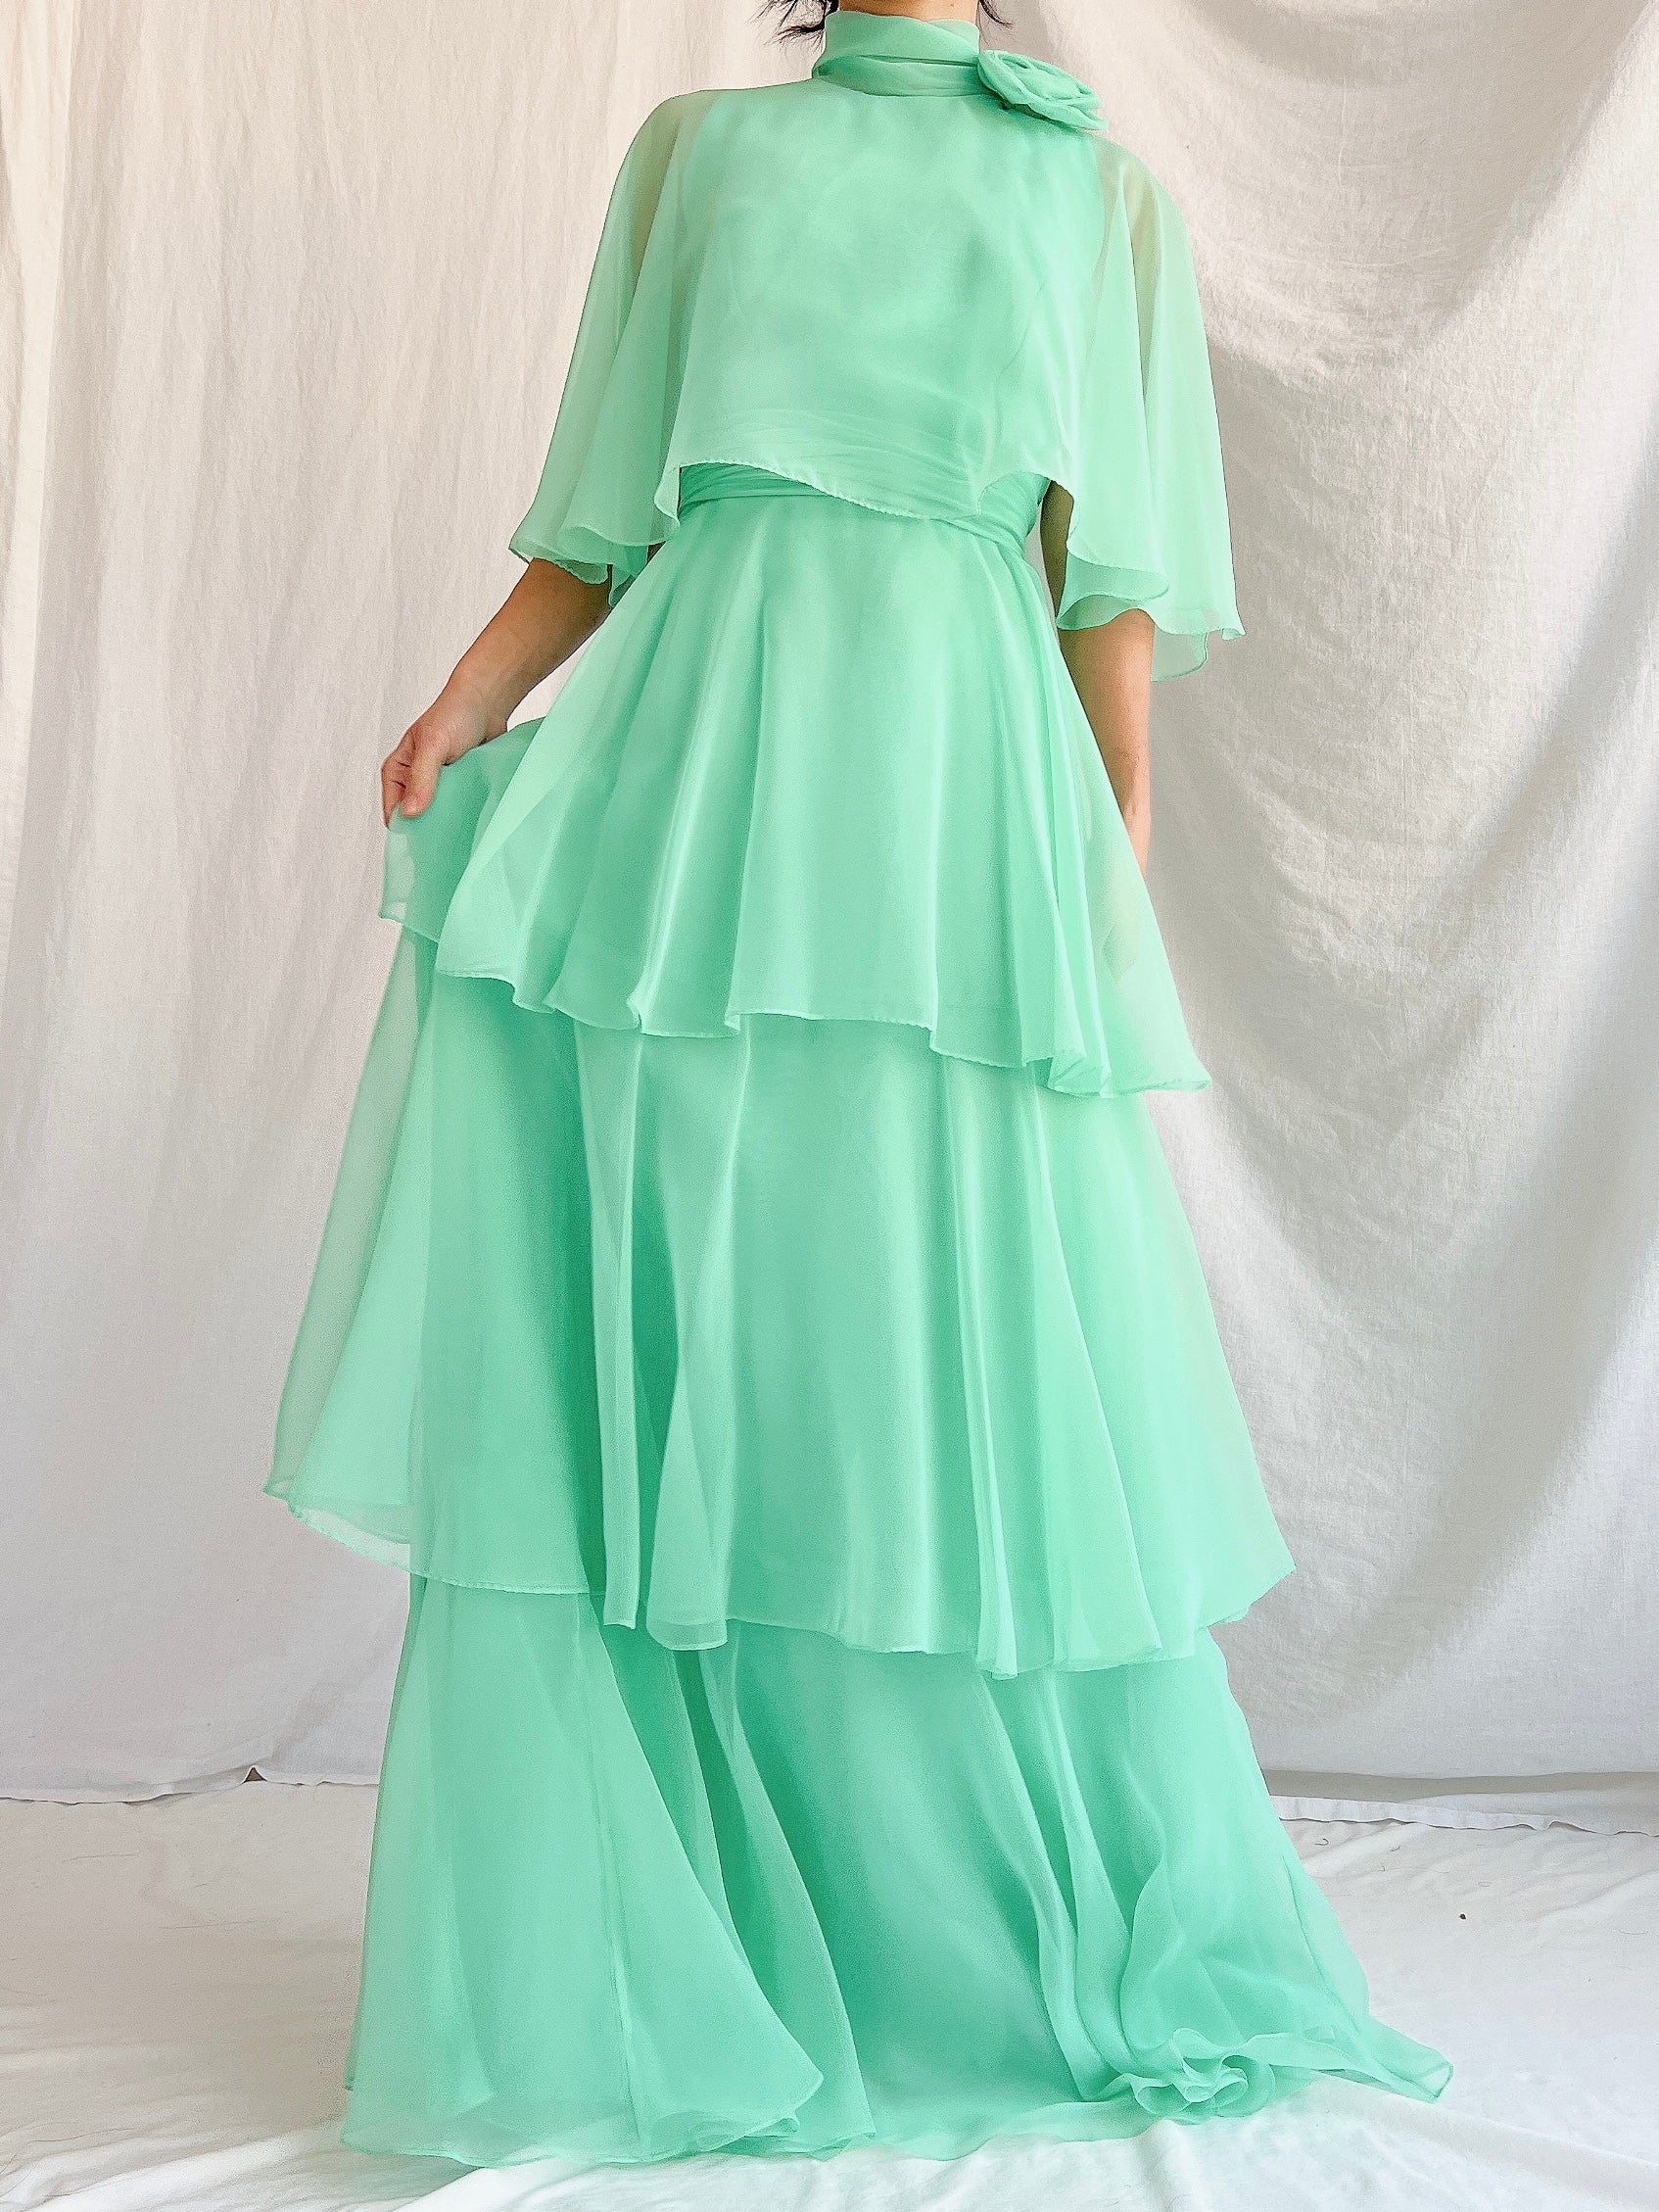 Vintage Teal Tiered Gown - XS/2